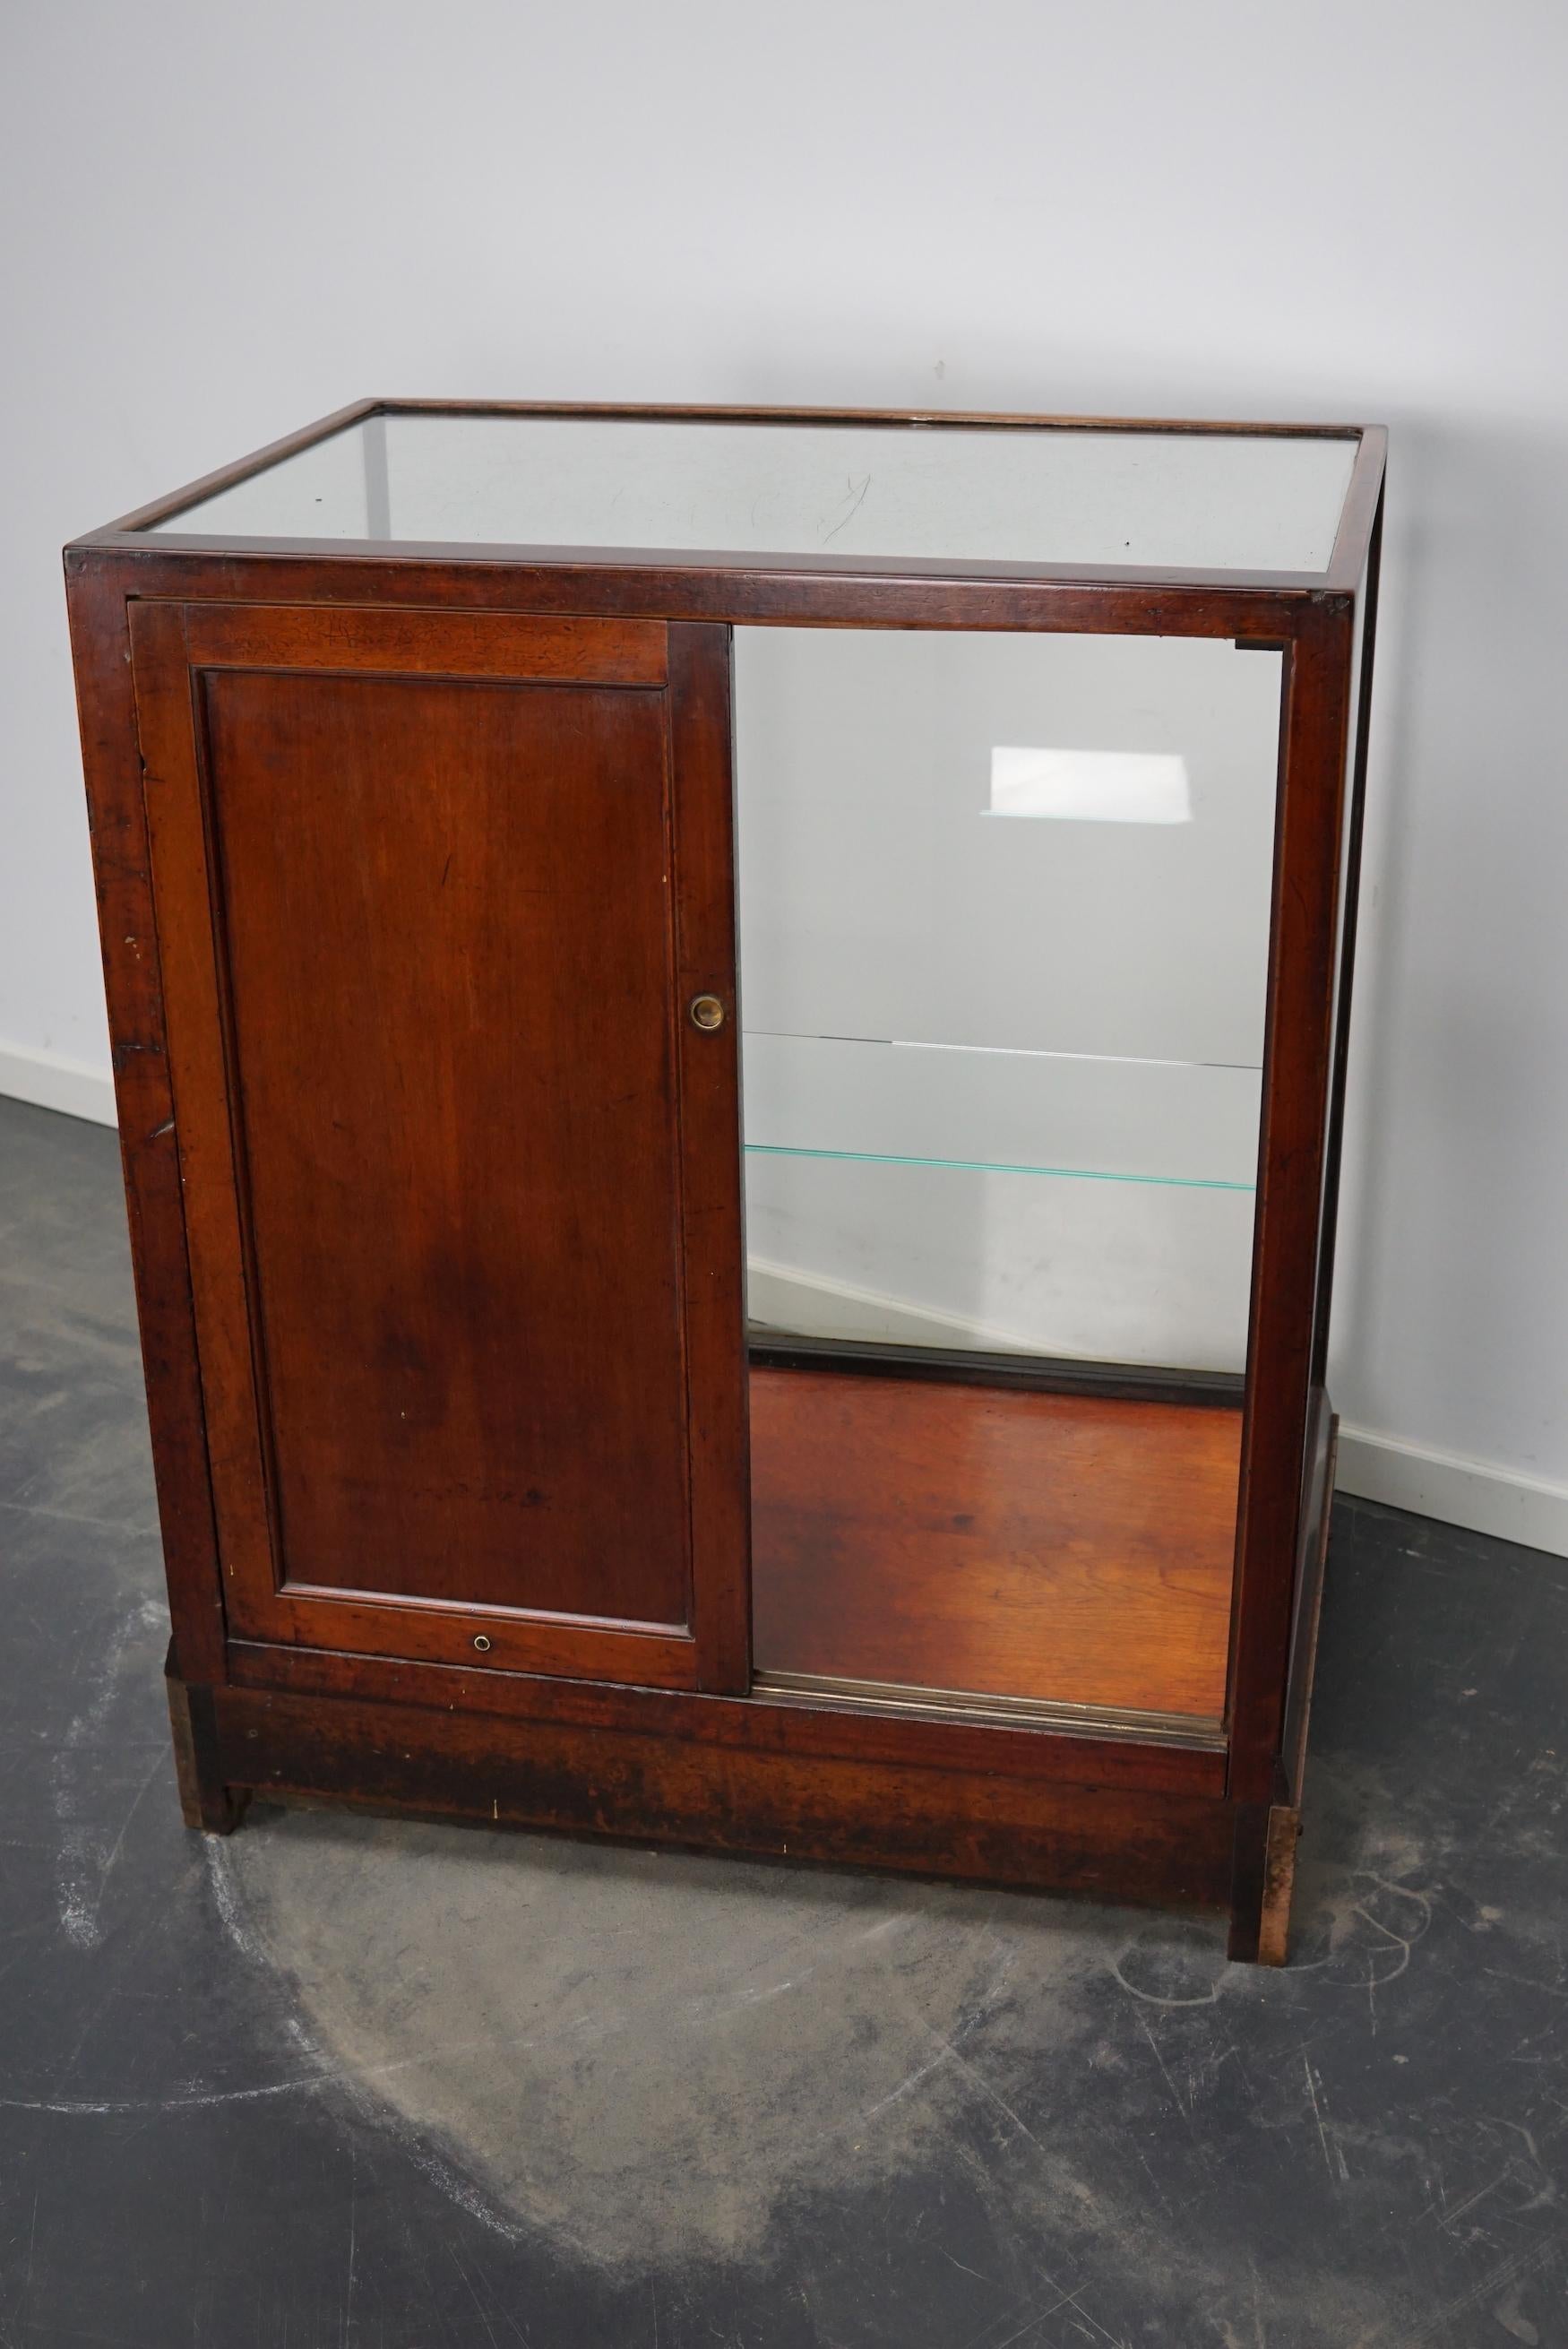 Victorian Mahogany Shop Display Cabinet / Counter or Vitrine, Late 19th Century For Sale 1